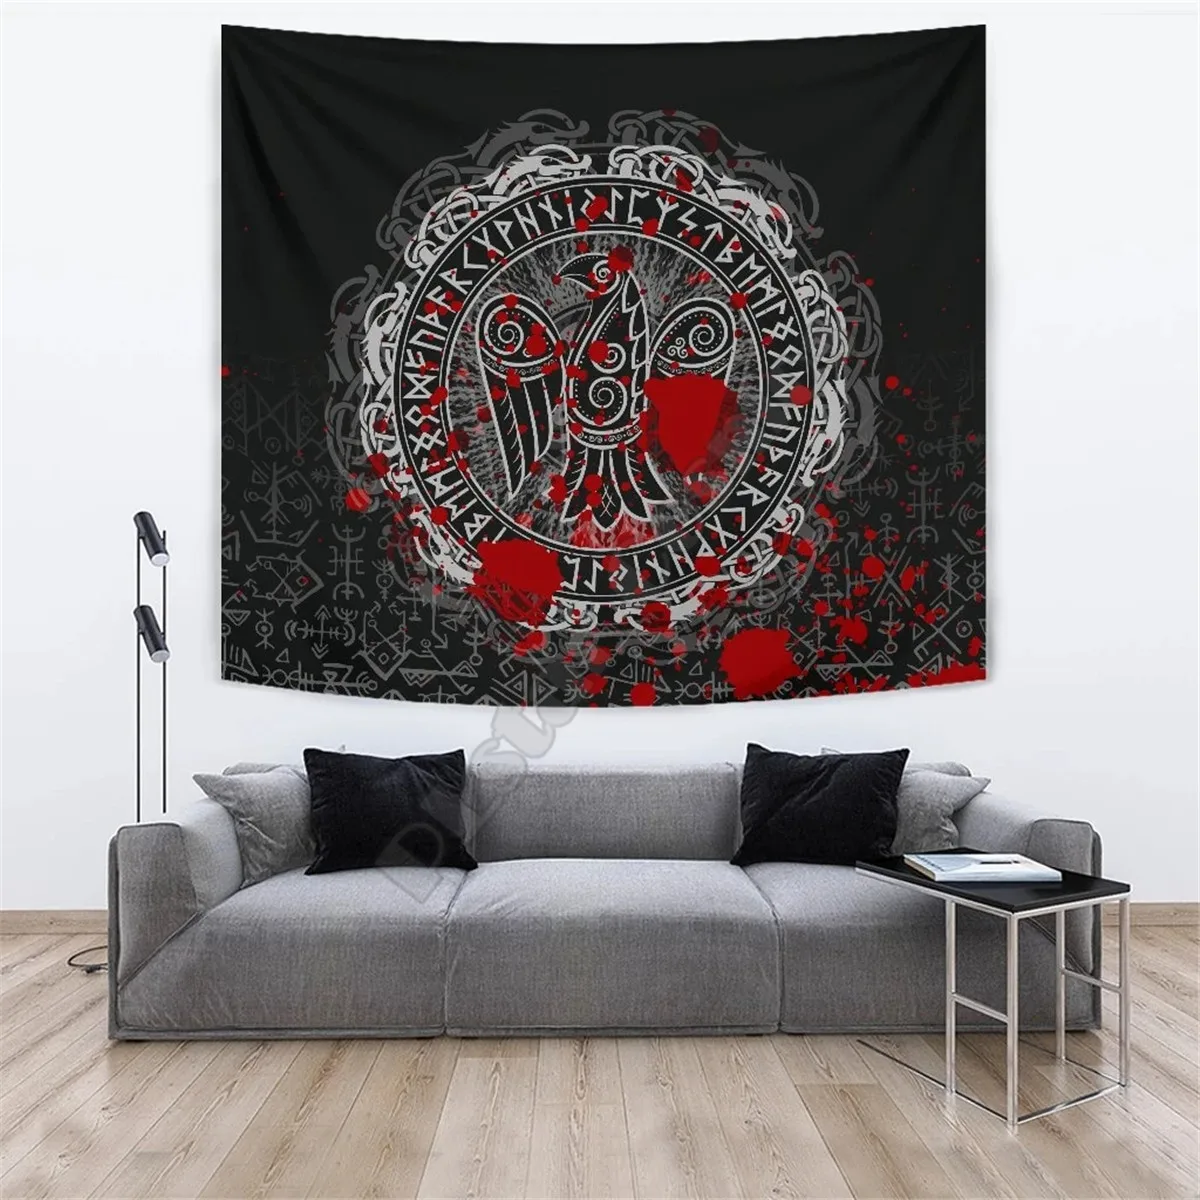 

Viking Style Tapestry Raven Celtic Tattoo Blood 3D Printed Wall Tapestry Rectangular Home Decor Wall Hanging Home Decoration